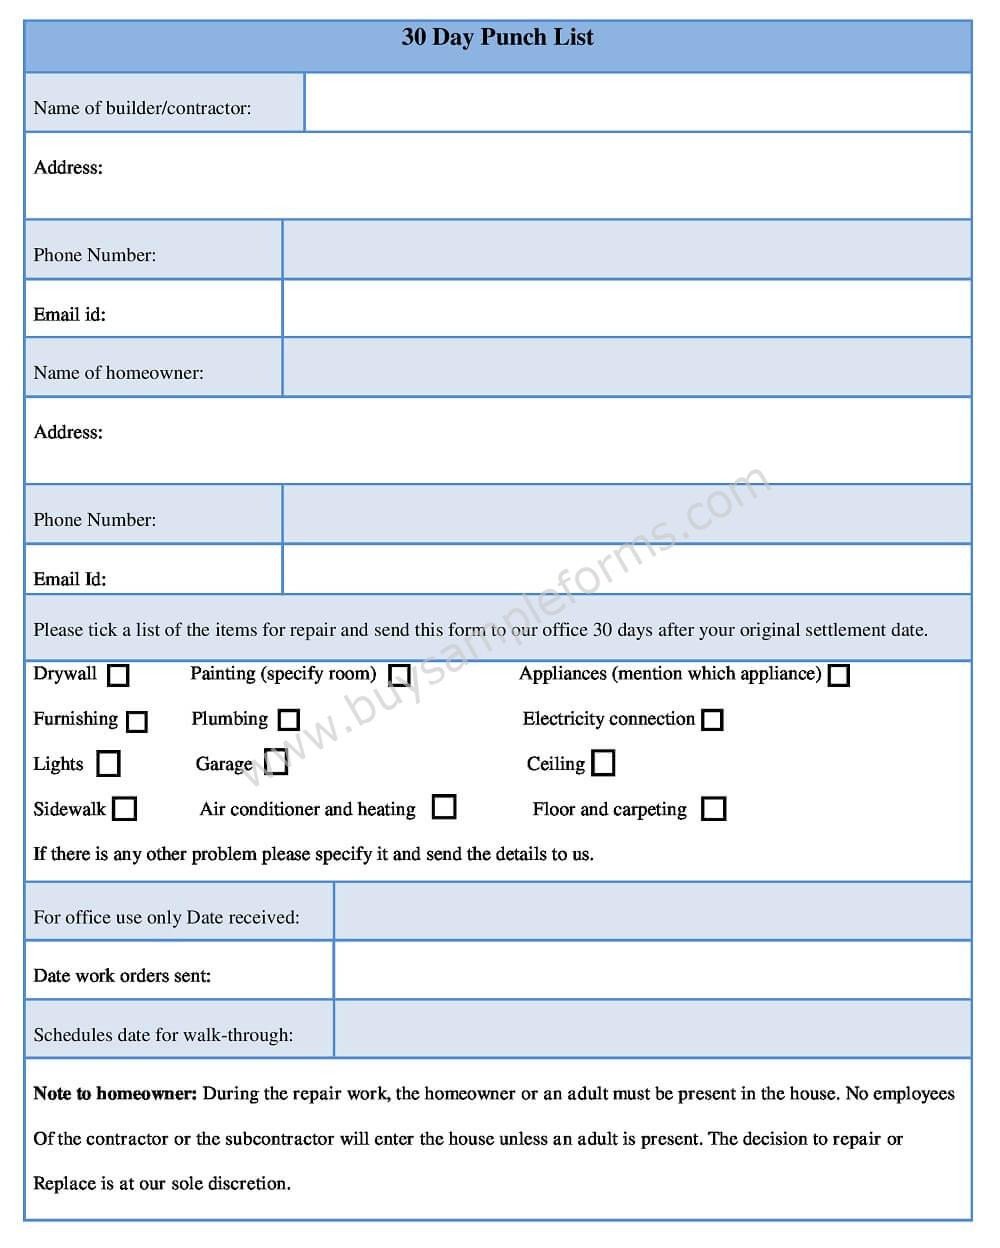 Download 30 Day Punch List Form in Word